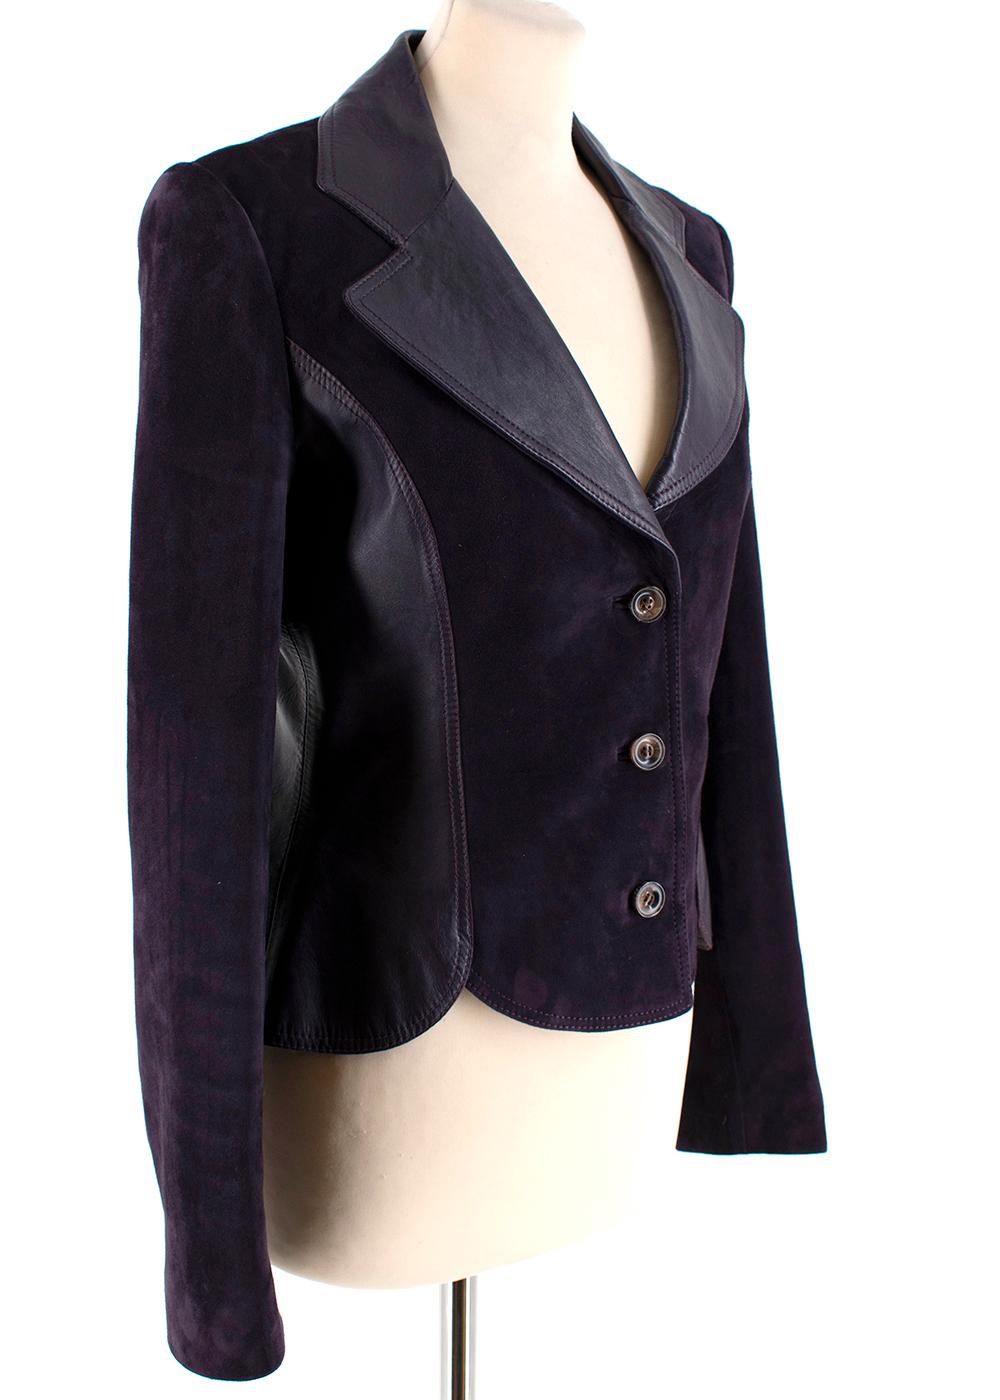 Valentino Purple Leather and Suede Jacket 

- Three Button Front Fastening 
- Relaxed Leather Collar 
- Leather Side Panel
- Single Breasted
- Curved Hemline
- Fully Lines 

Material:
- Lambskin
- 100% Bemberg Lining 
- Fitted

Made in Italy